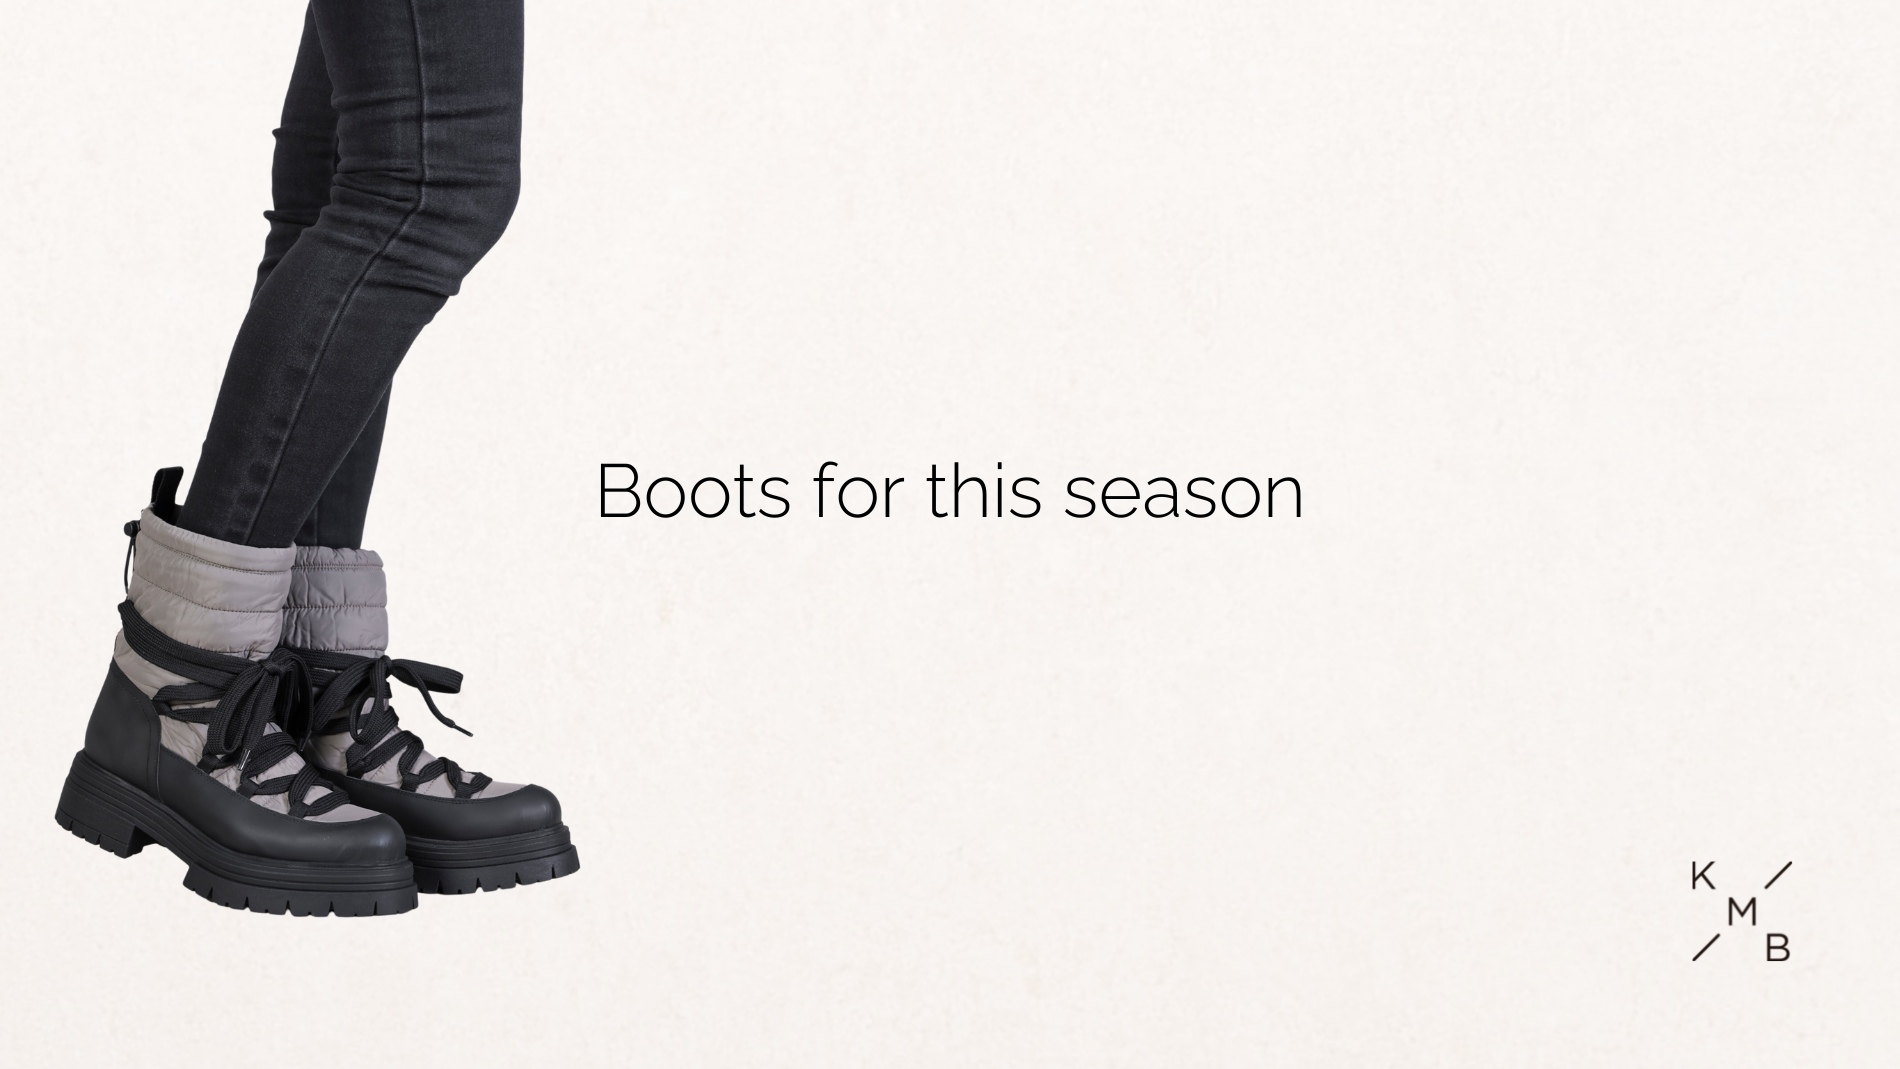 Boots you must have this season